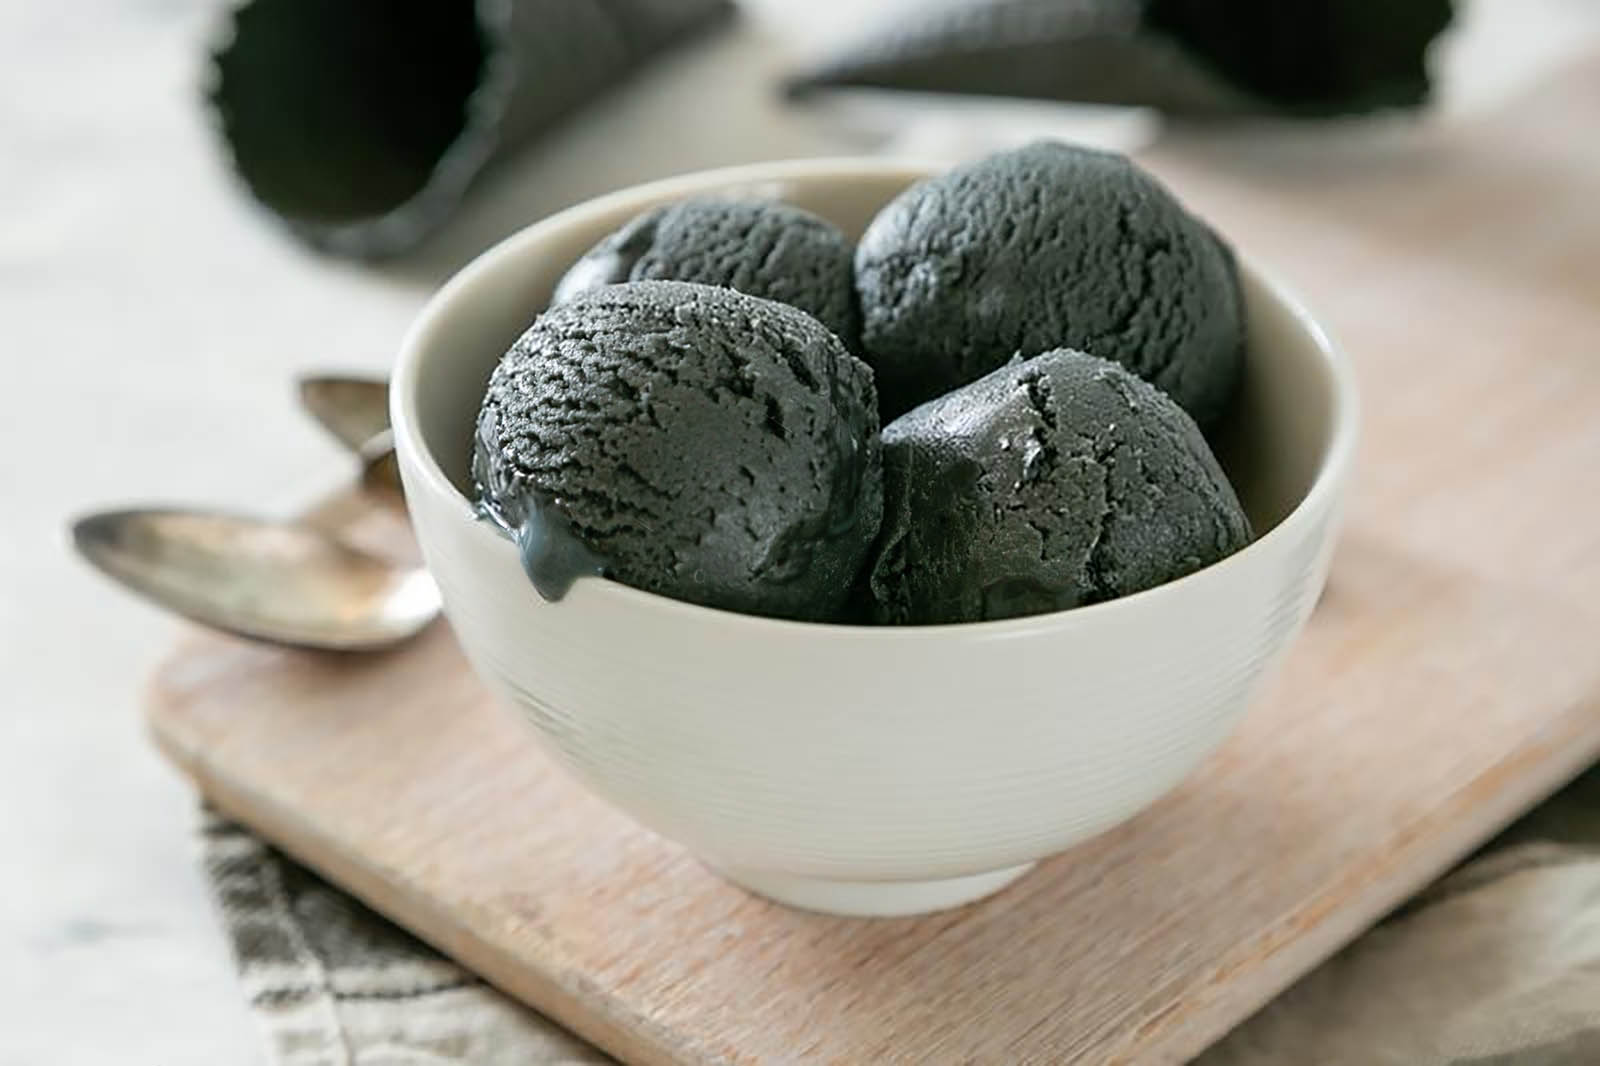 What C Drink Are You? Activated Charcoal Ice Cream